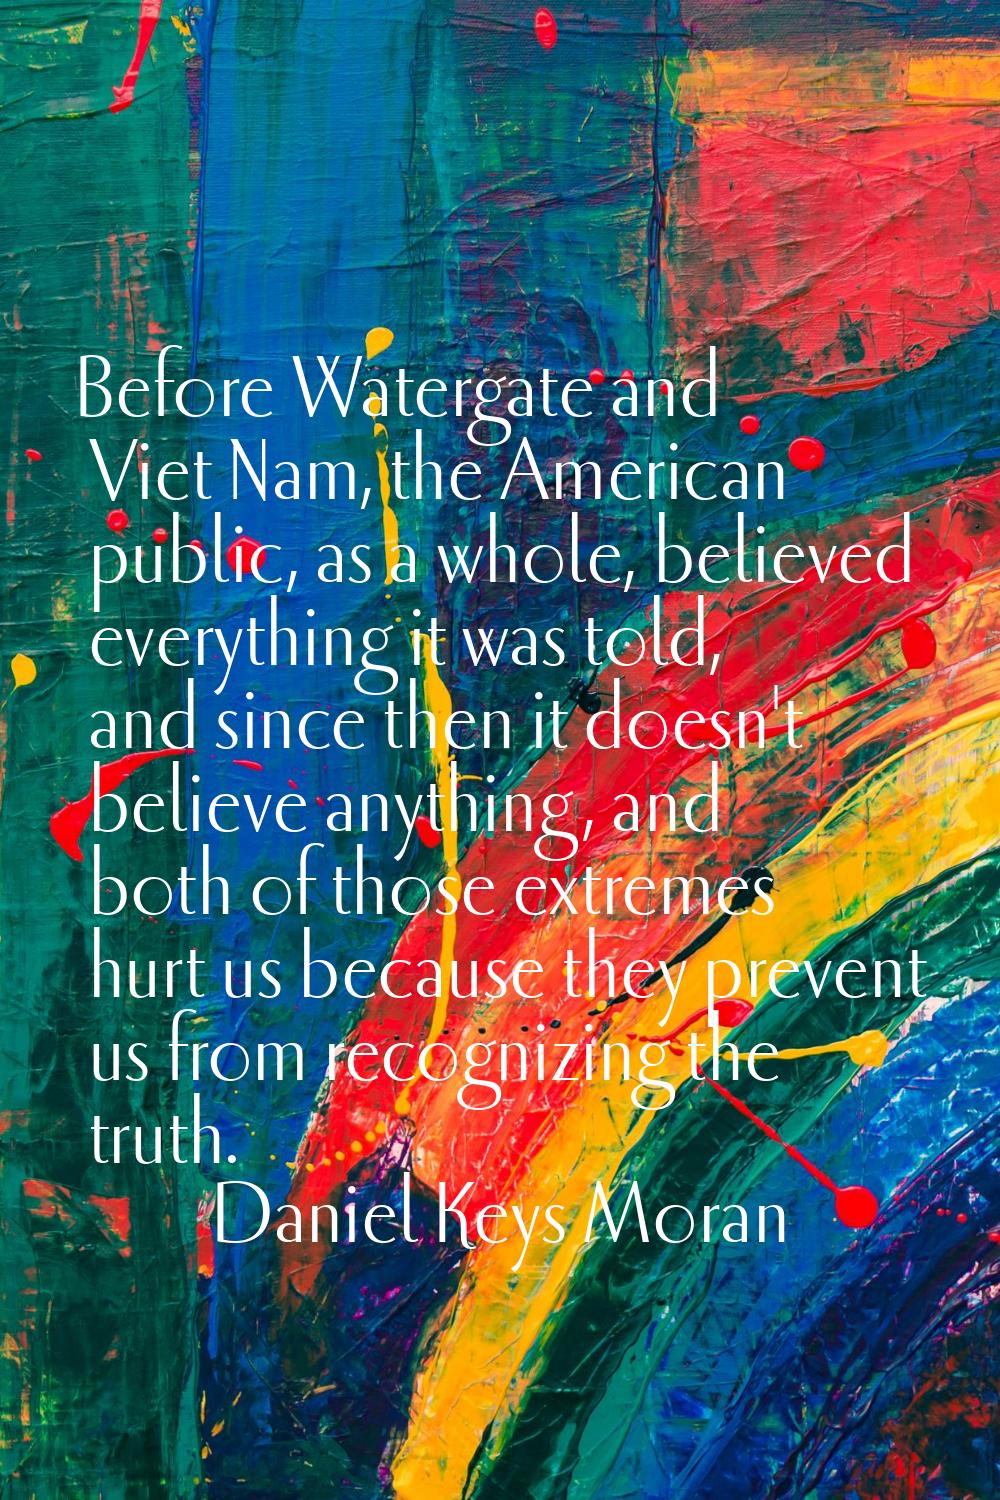 Before Watergate and Viet Nam, the American public, as a whole, believed everything it was told, an